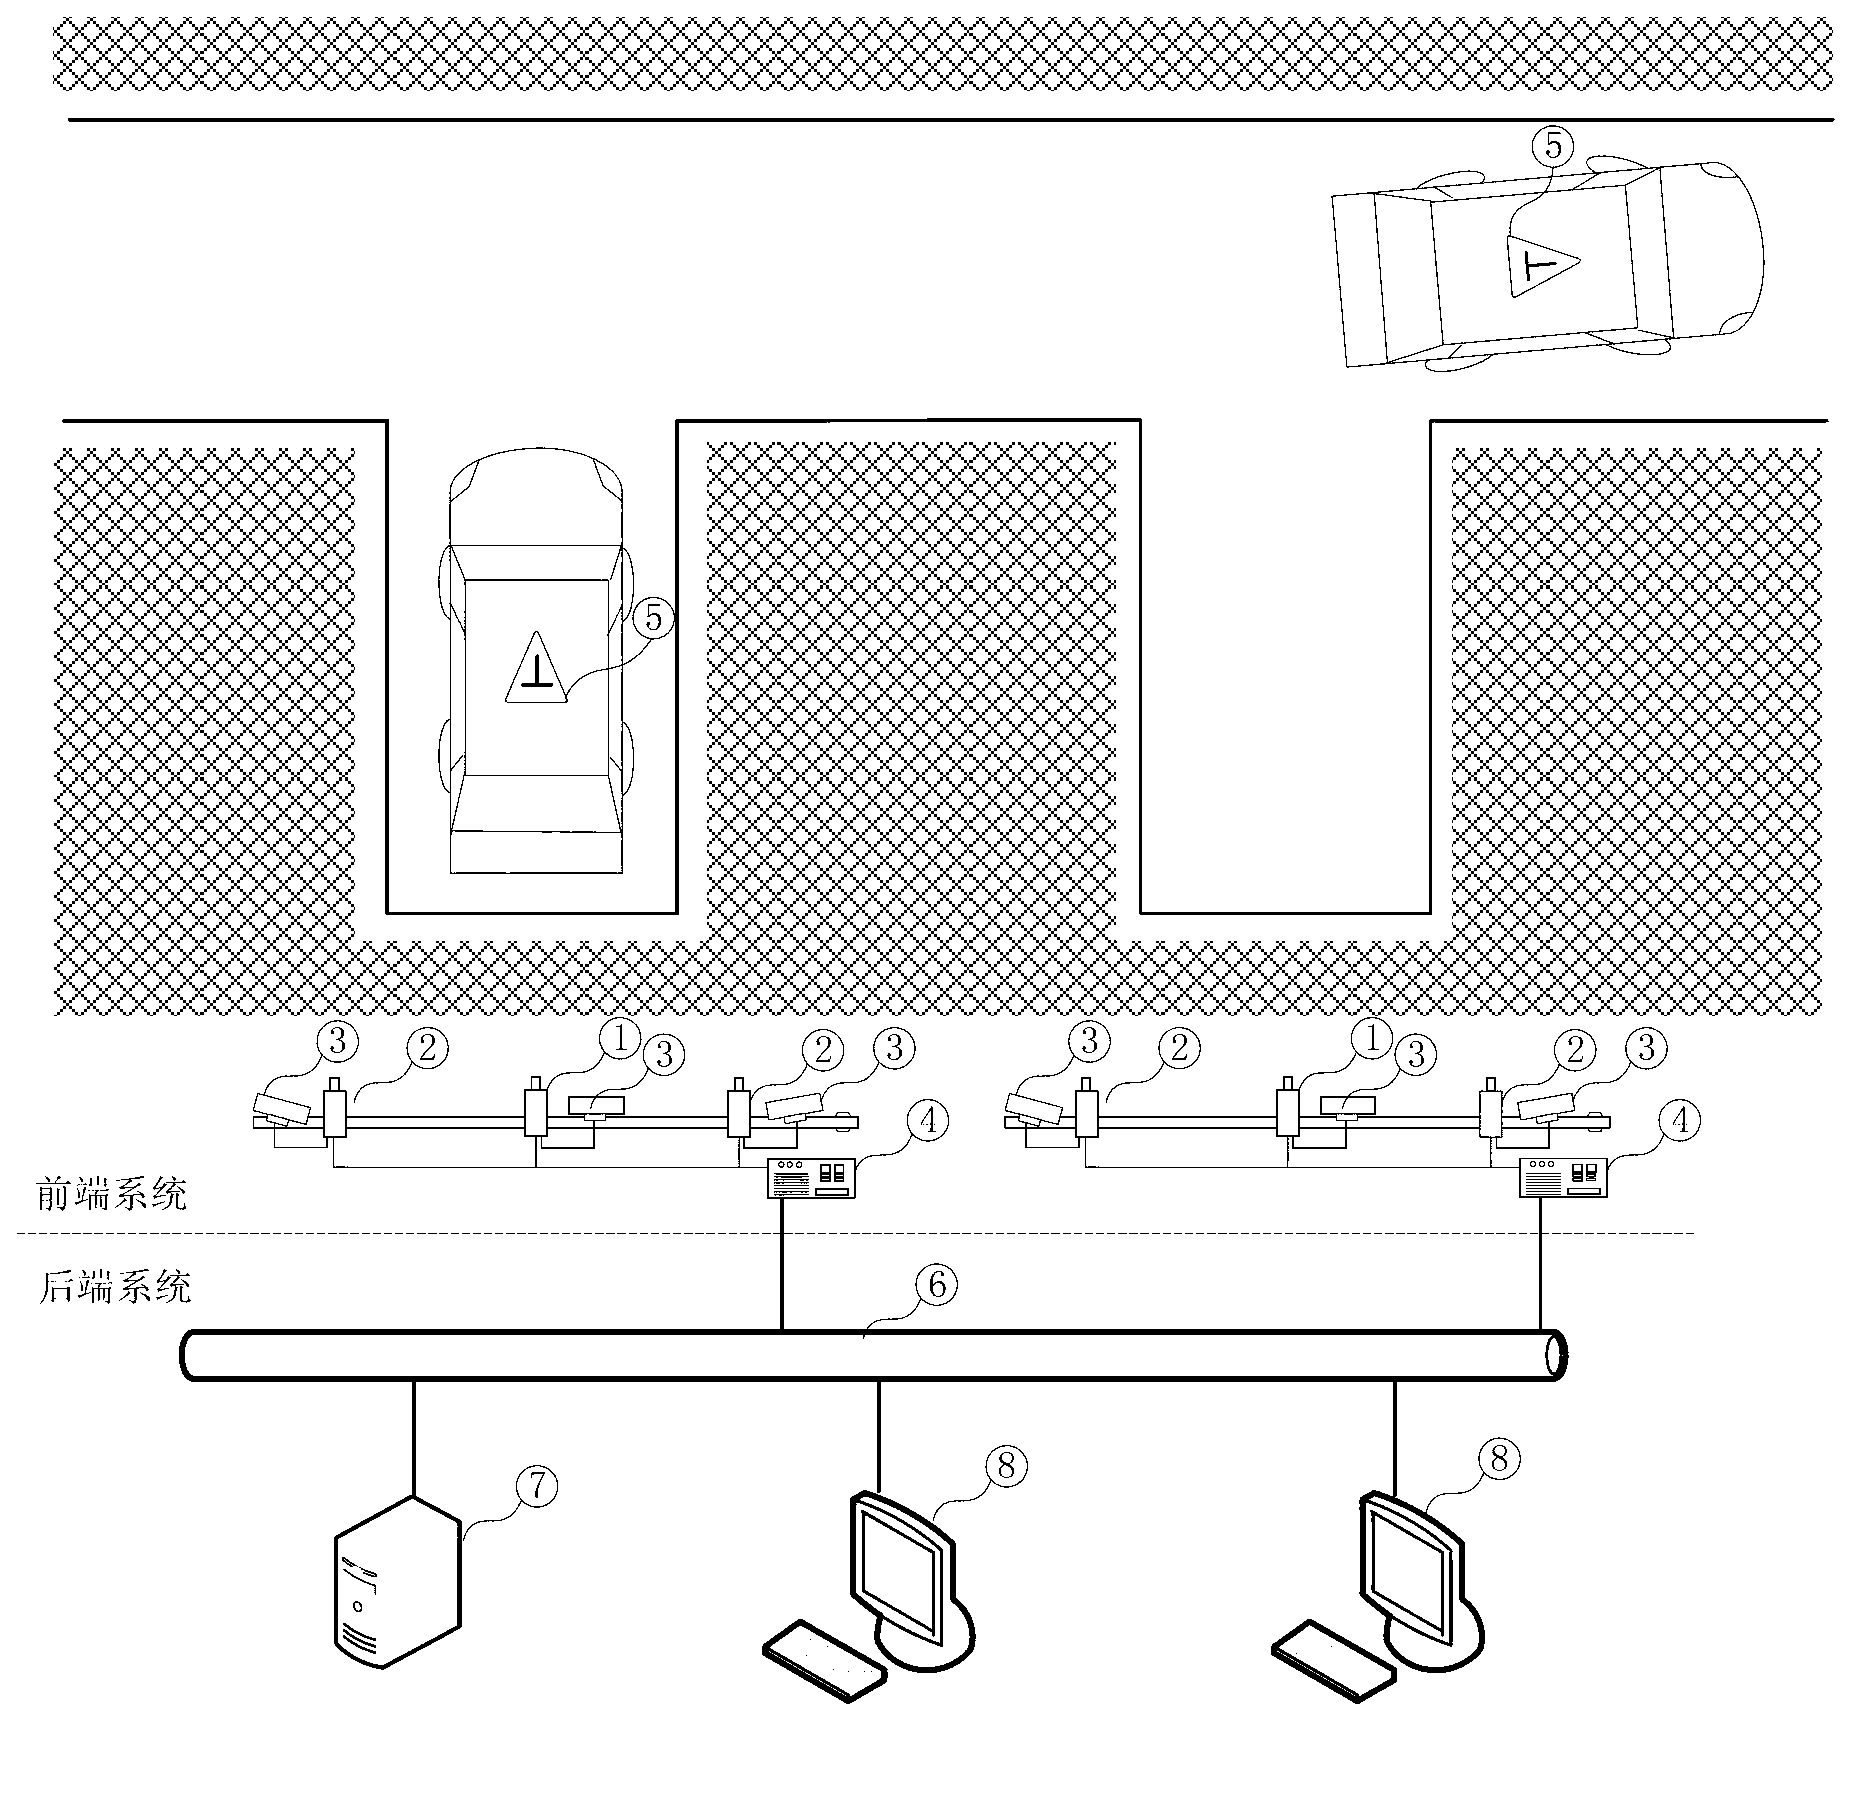 Detection system for backing car into storage and detection method thereof